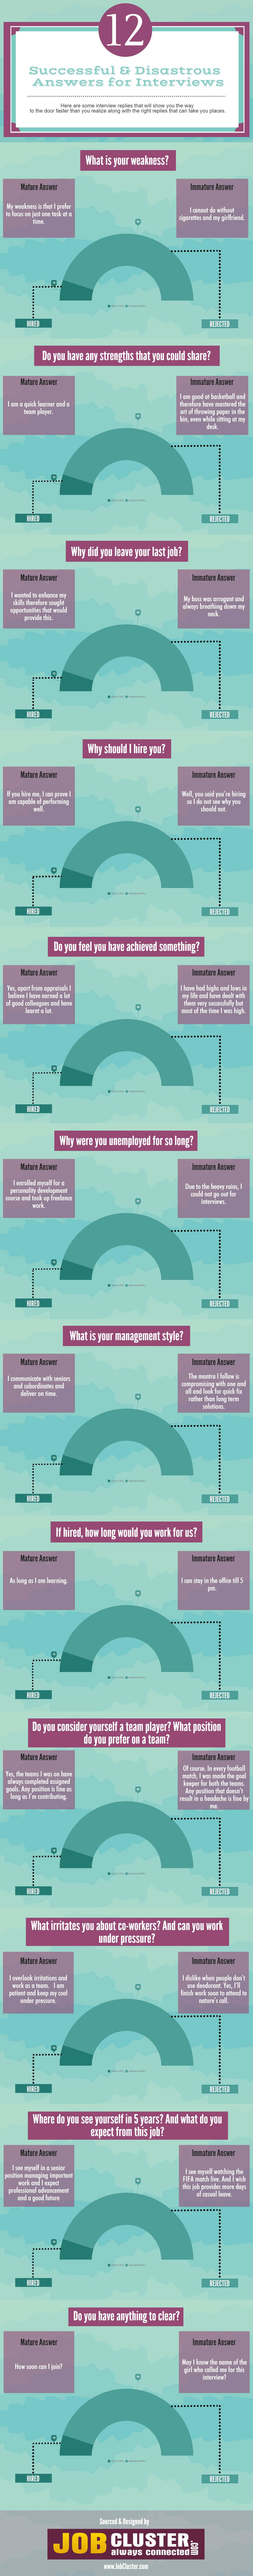 Sample for Behavioral Interview Questions and Answers- Infographic